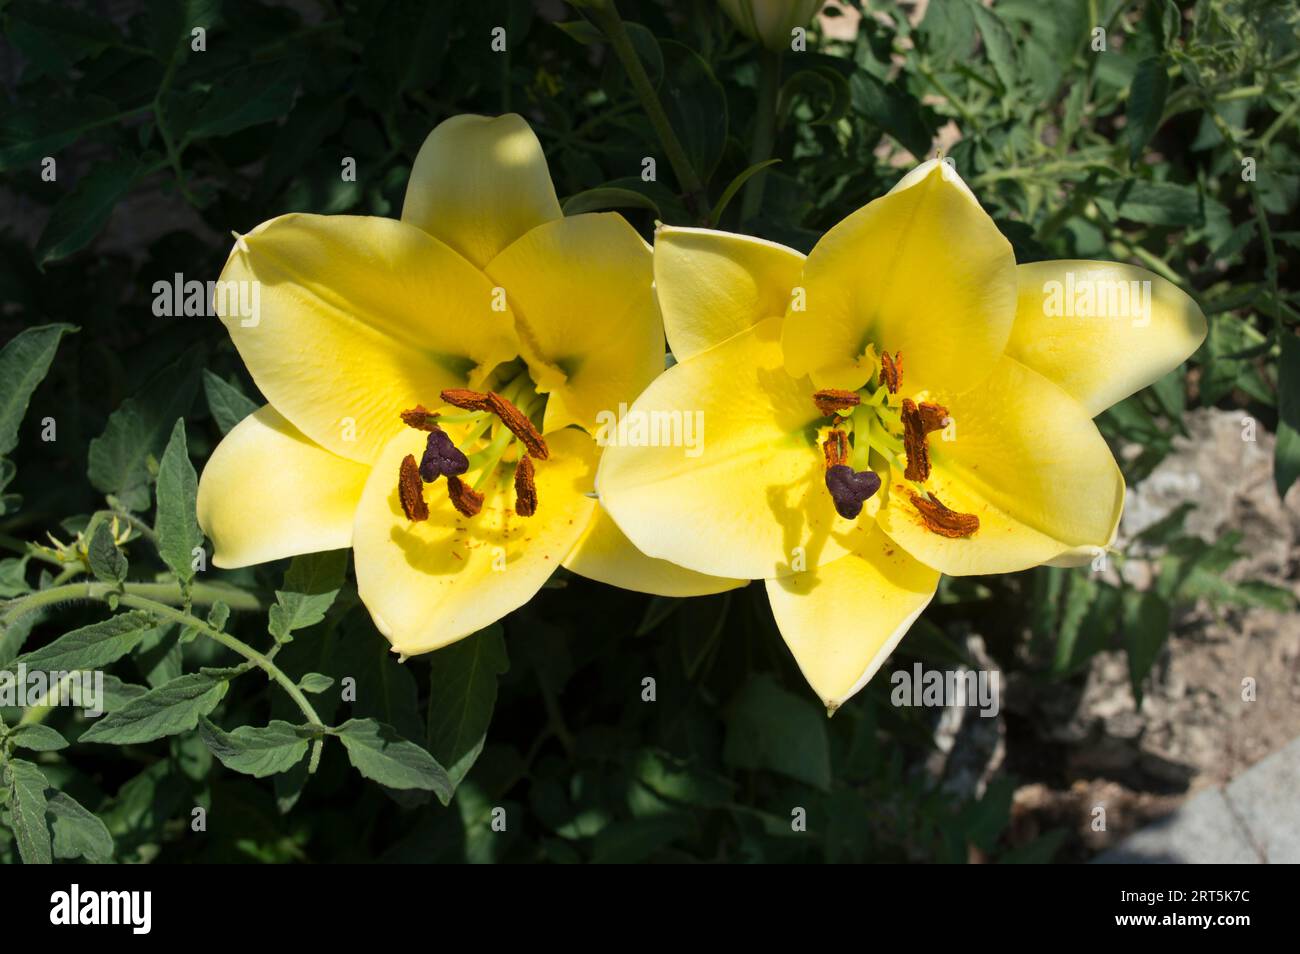 Garden flowers in spring, yellow lilies Stock Photo